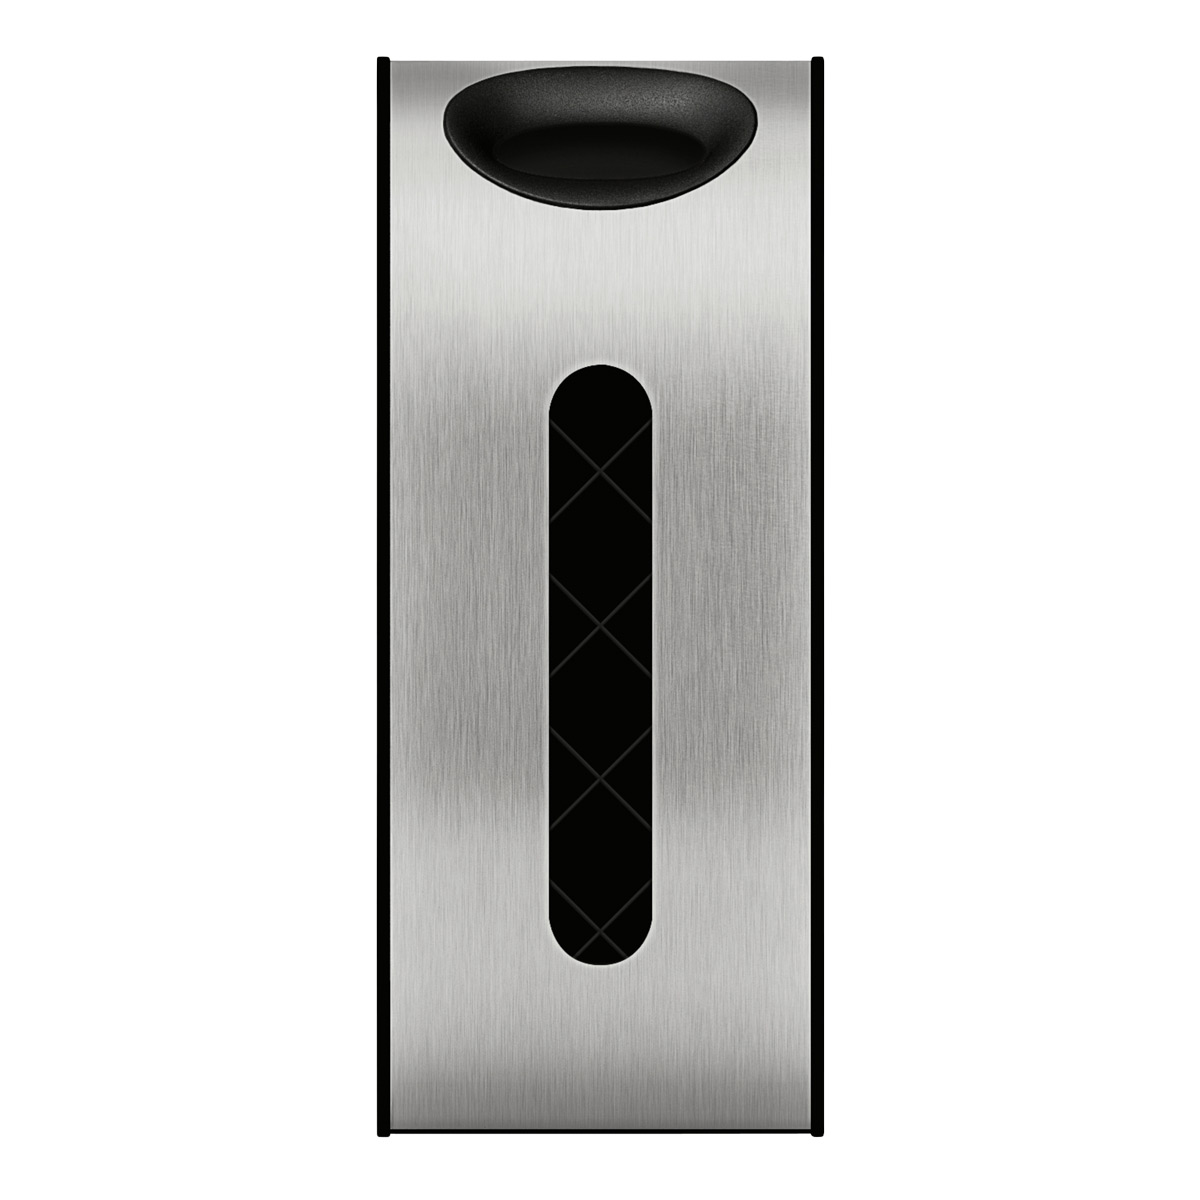 simplehuman Tension Arm Standing White Stainless Steel Paper Towel Holder  KT1186 - The Home Depot